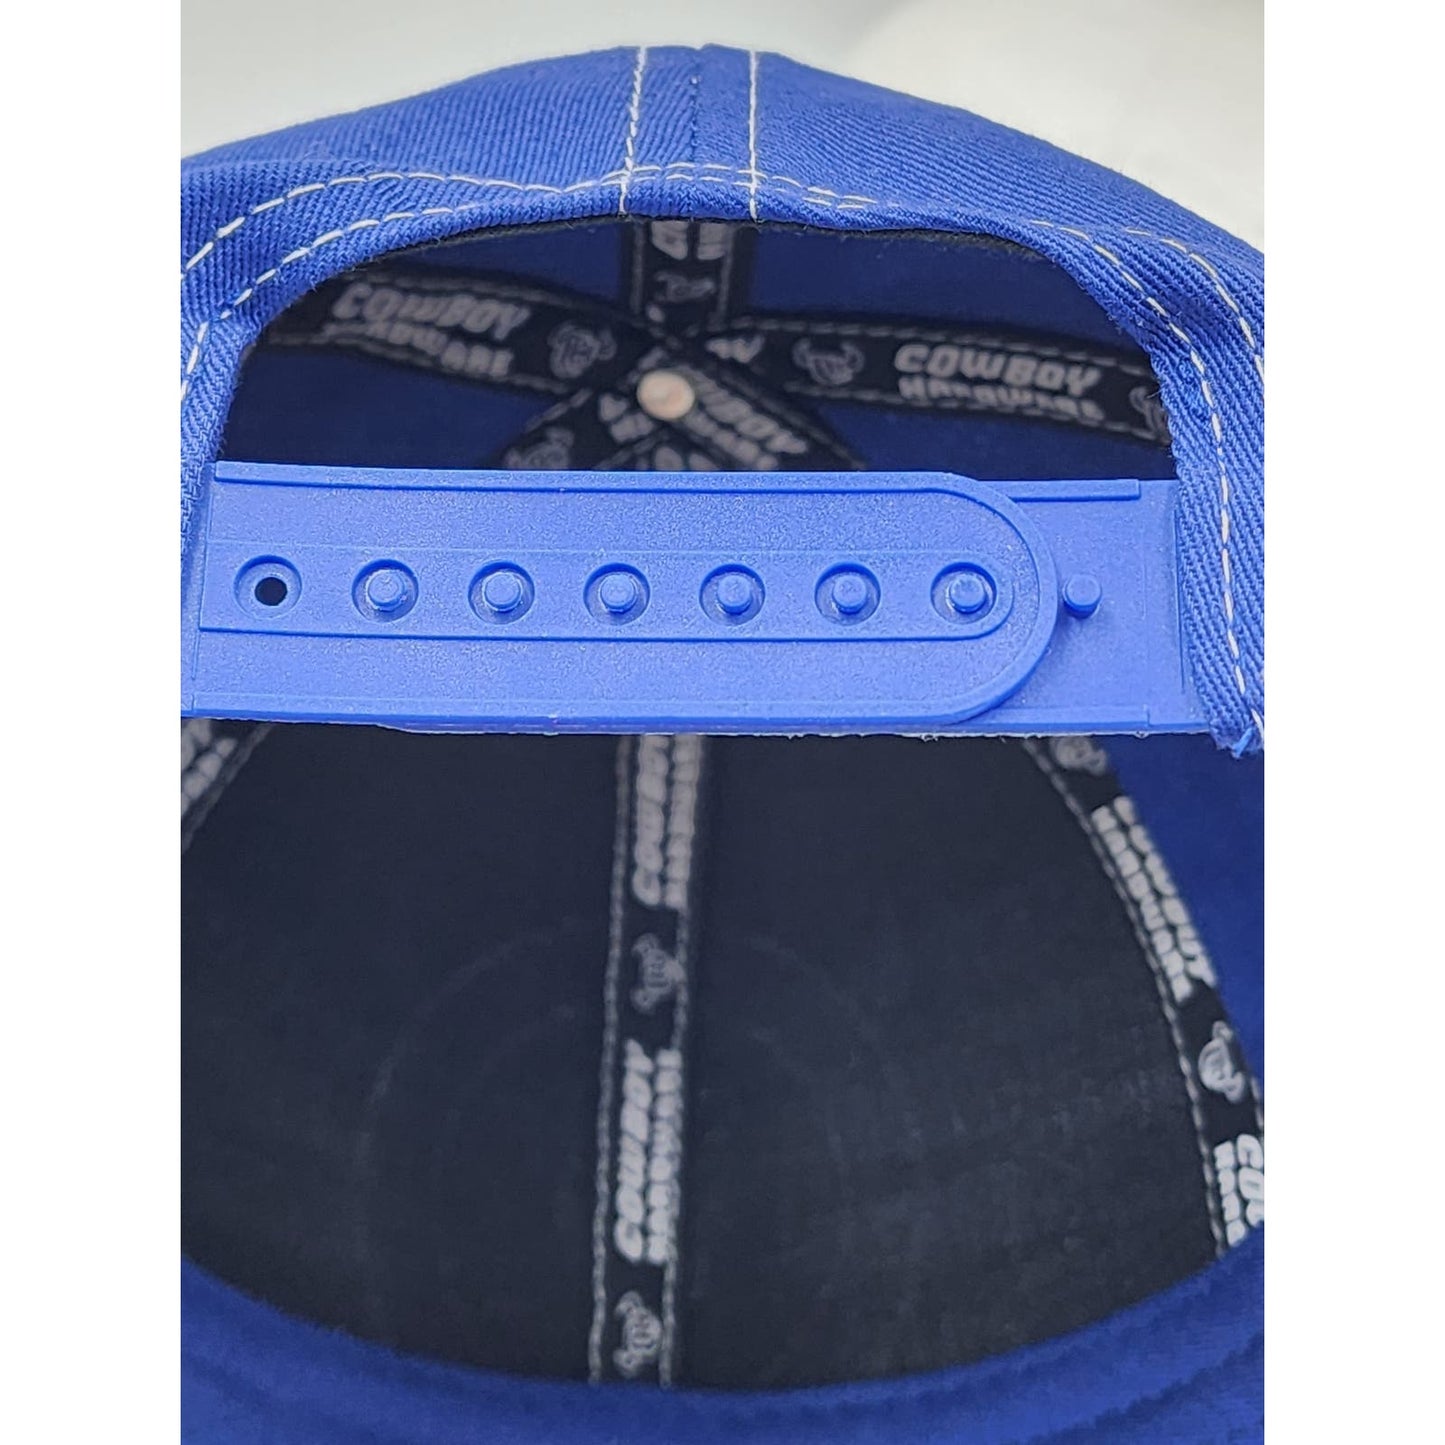 Cowboy Hardware Mess With Bull You Get Horn Hat Blue Cotton Snapback Trucker Cap